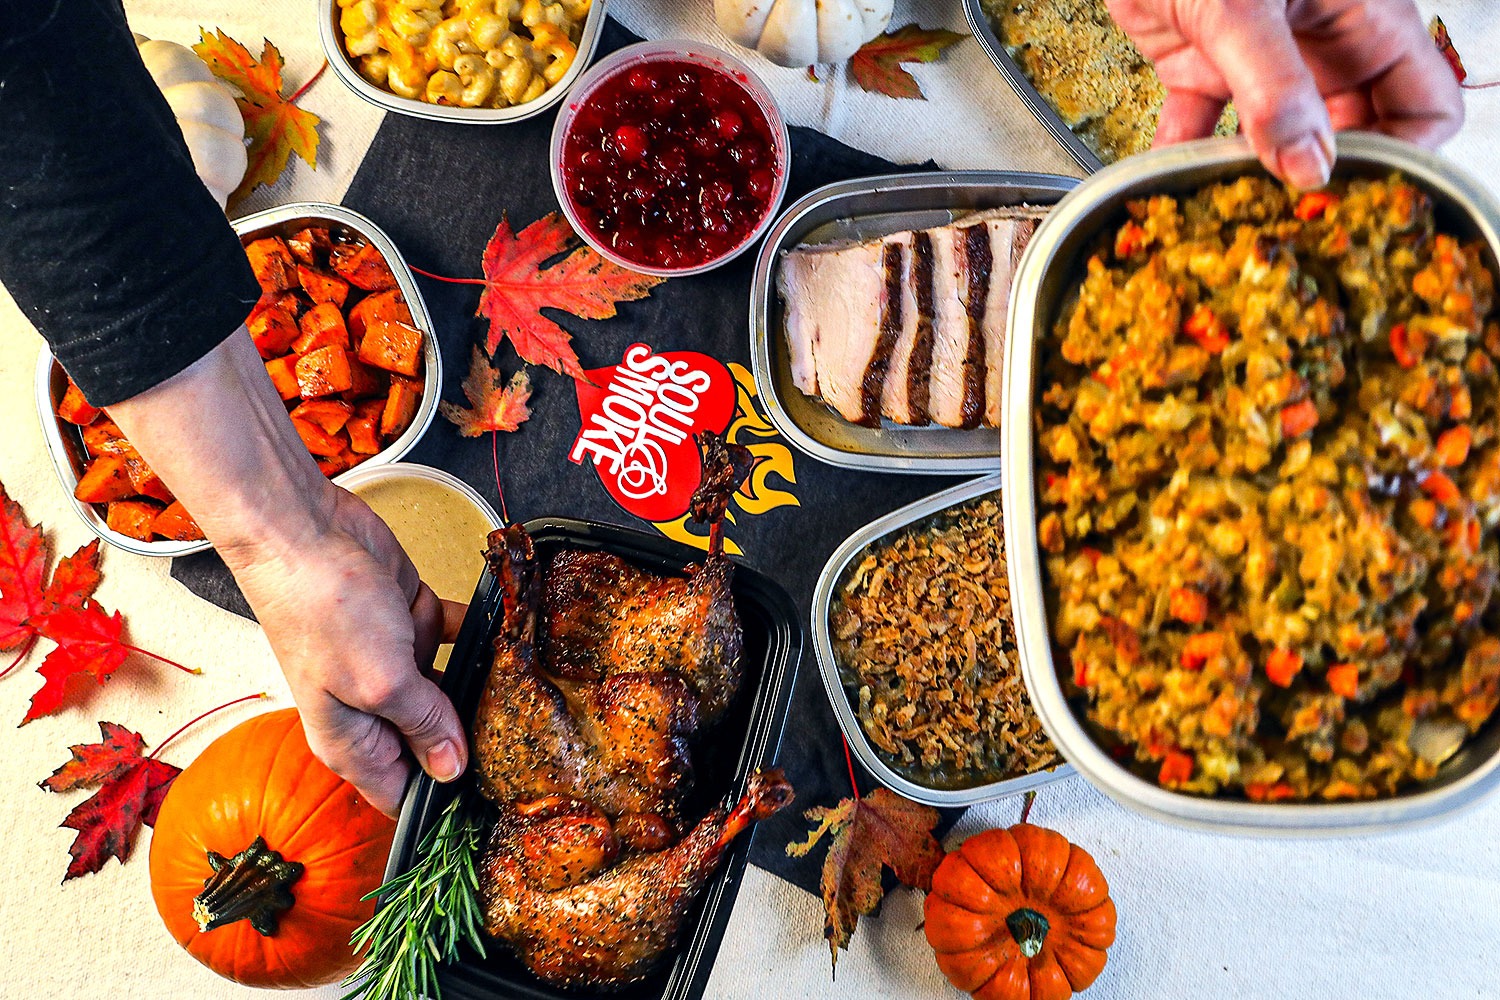 Thanksgiving food options from Soul & Smoke